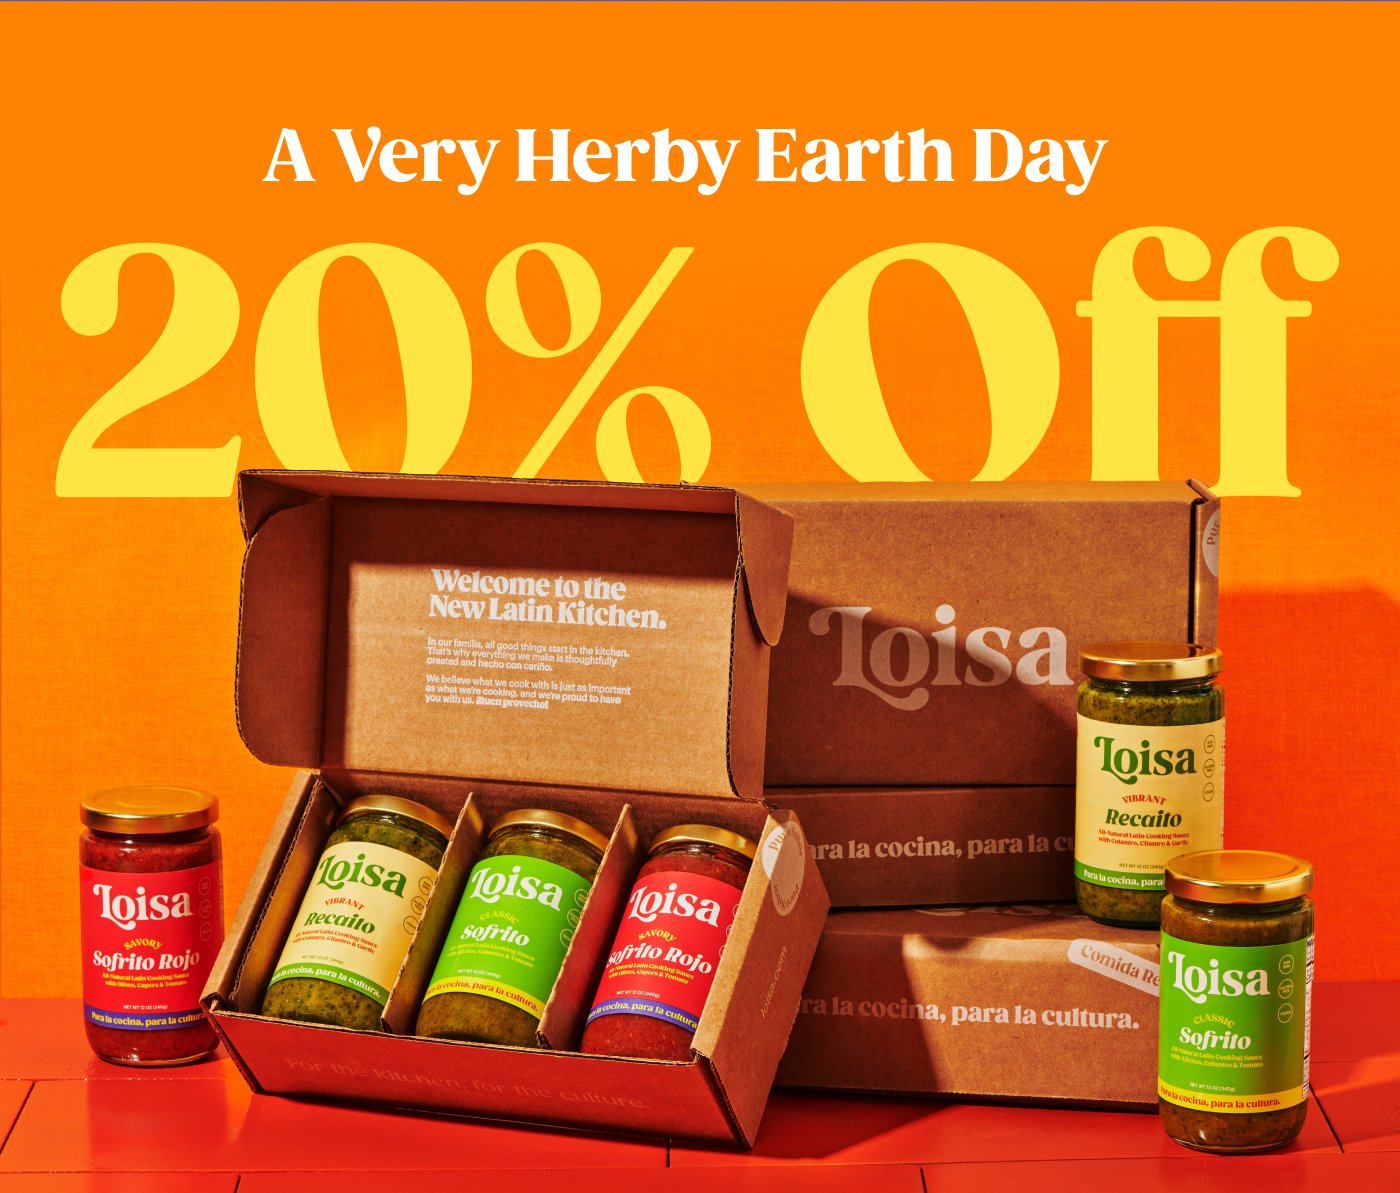 20% off Sofrito for Earth Day